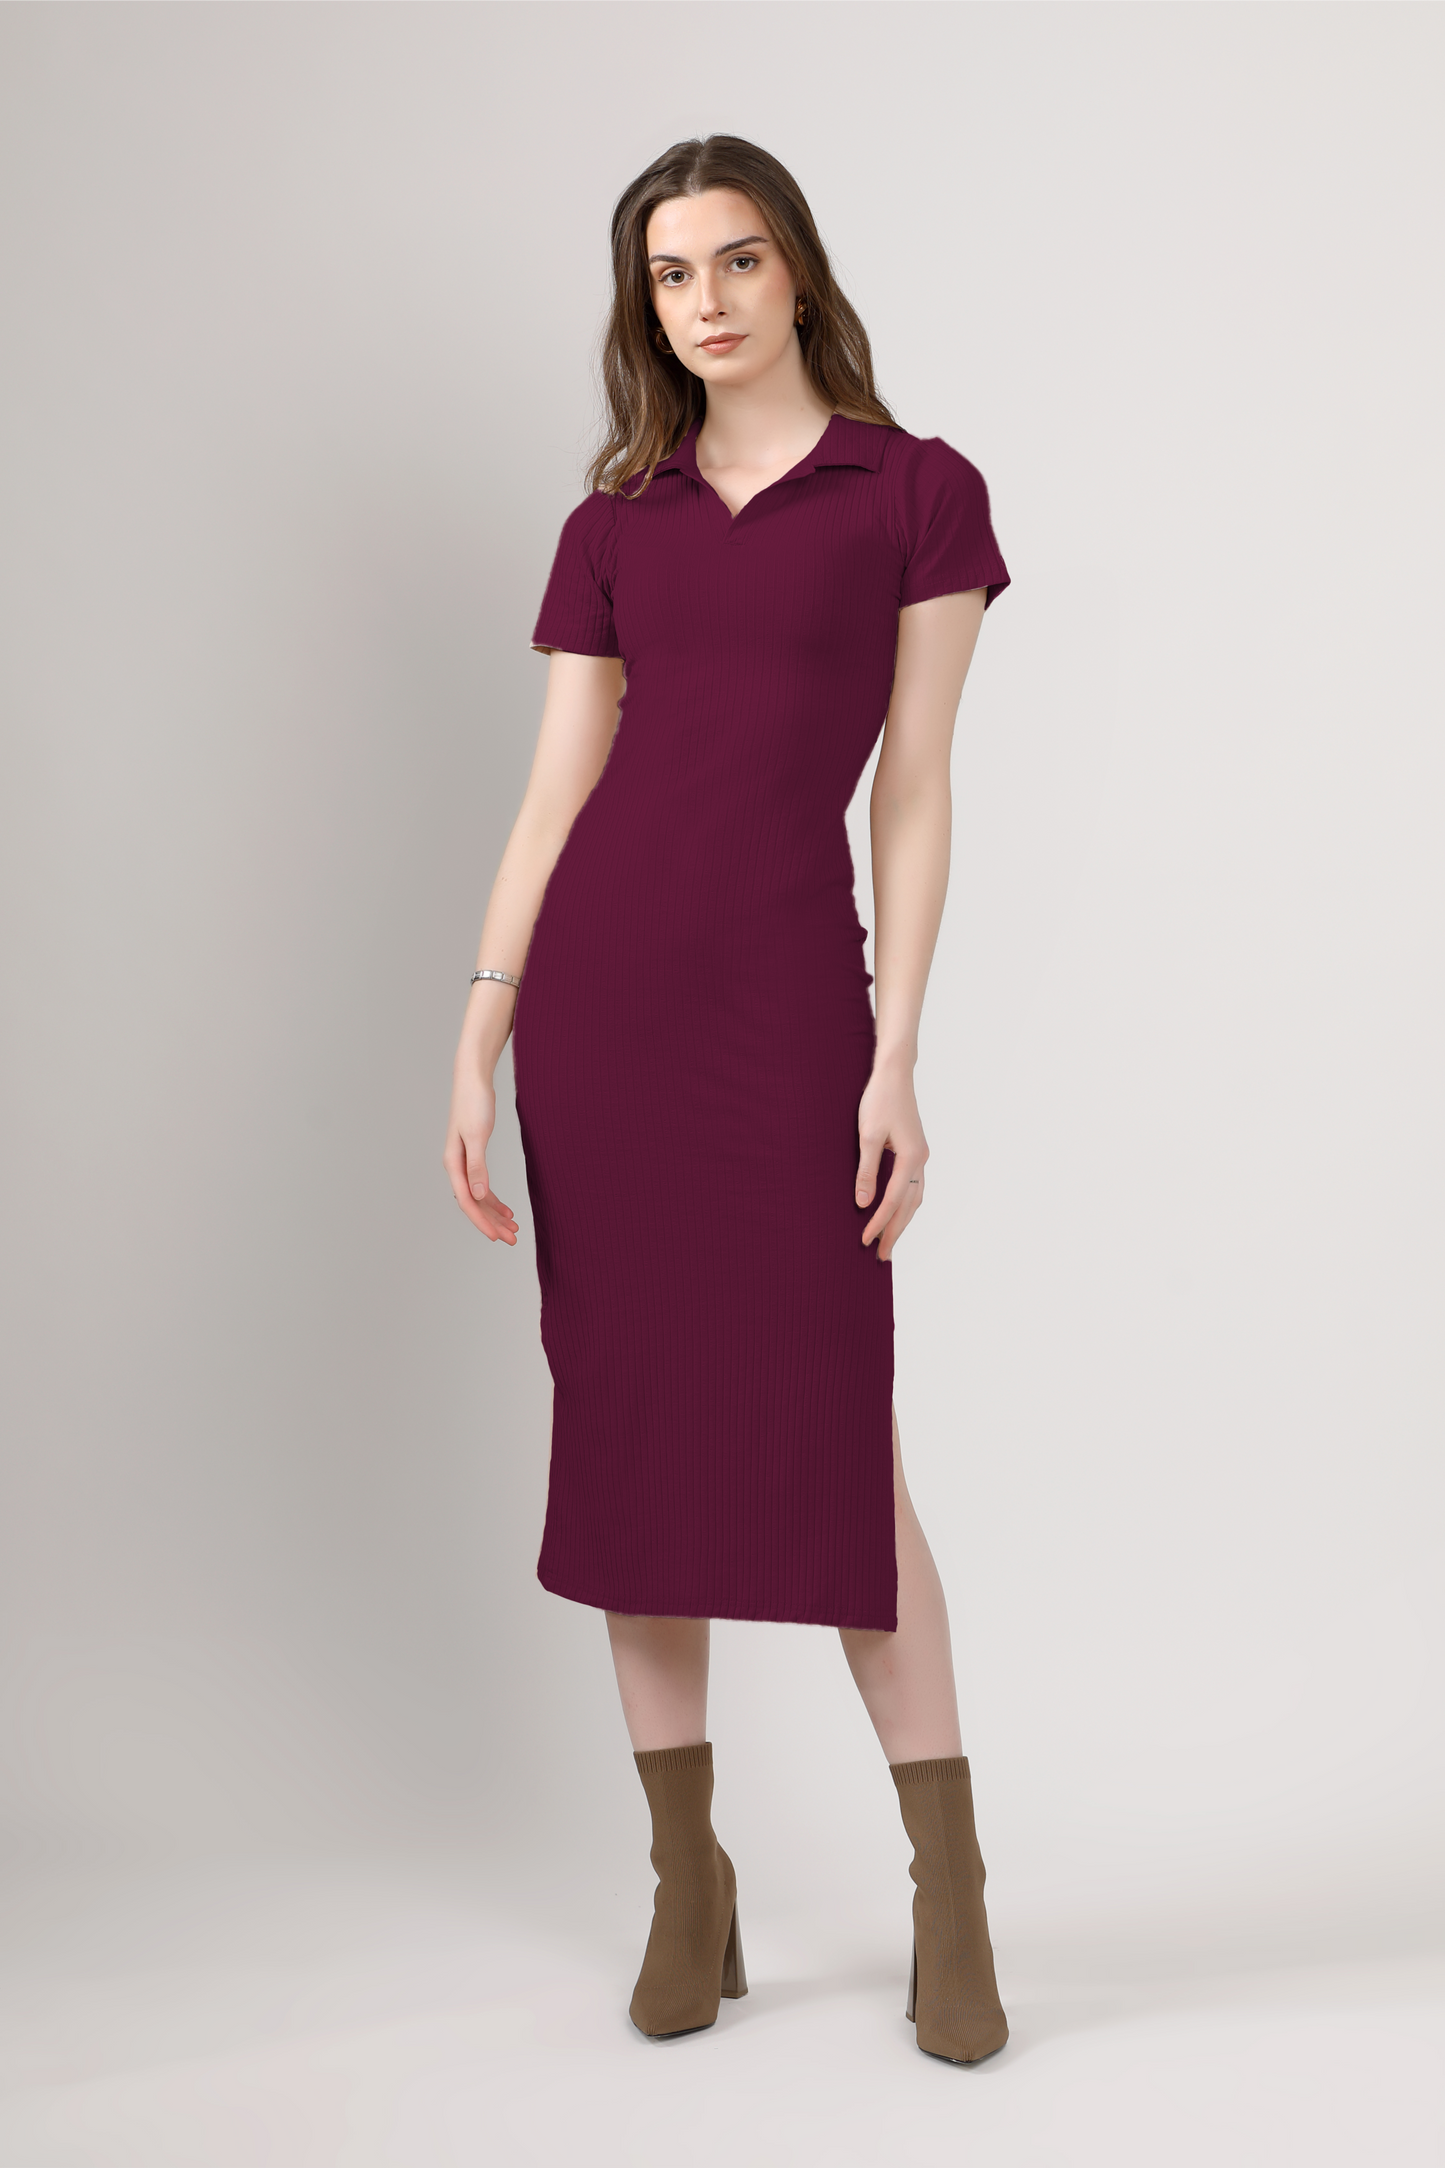 Ribbed Polo Dress - Cherry berry